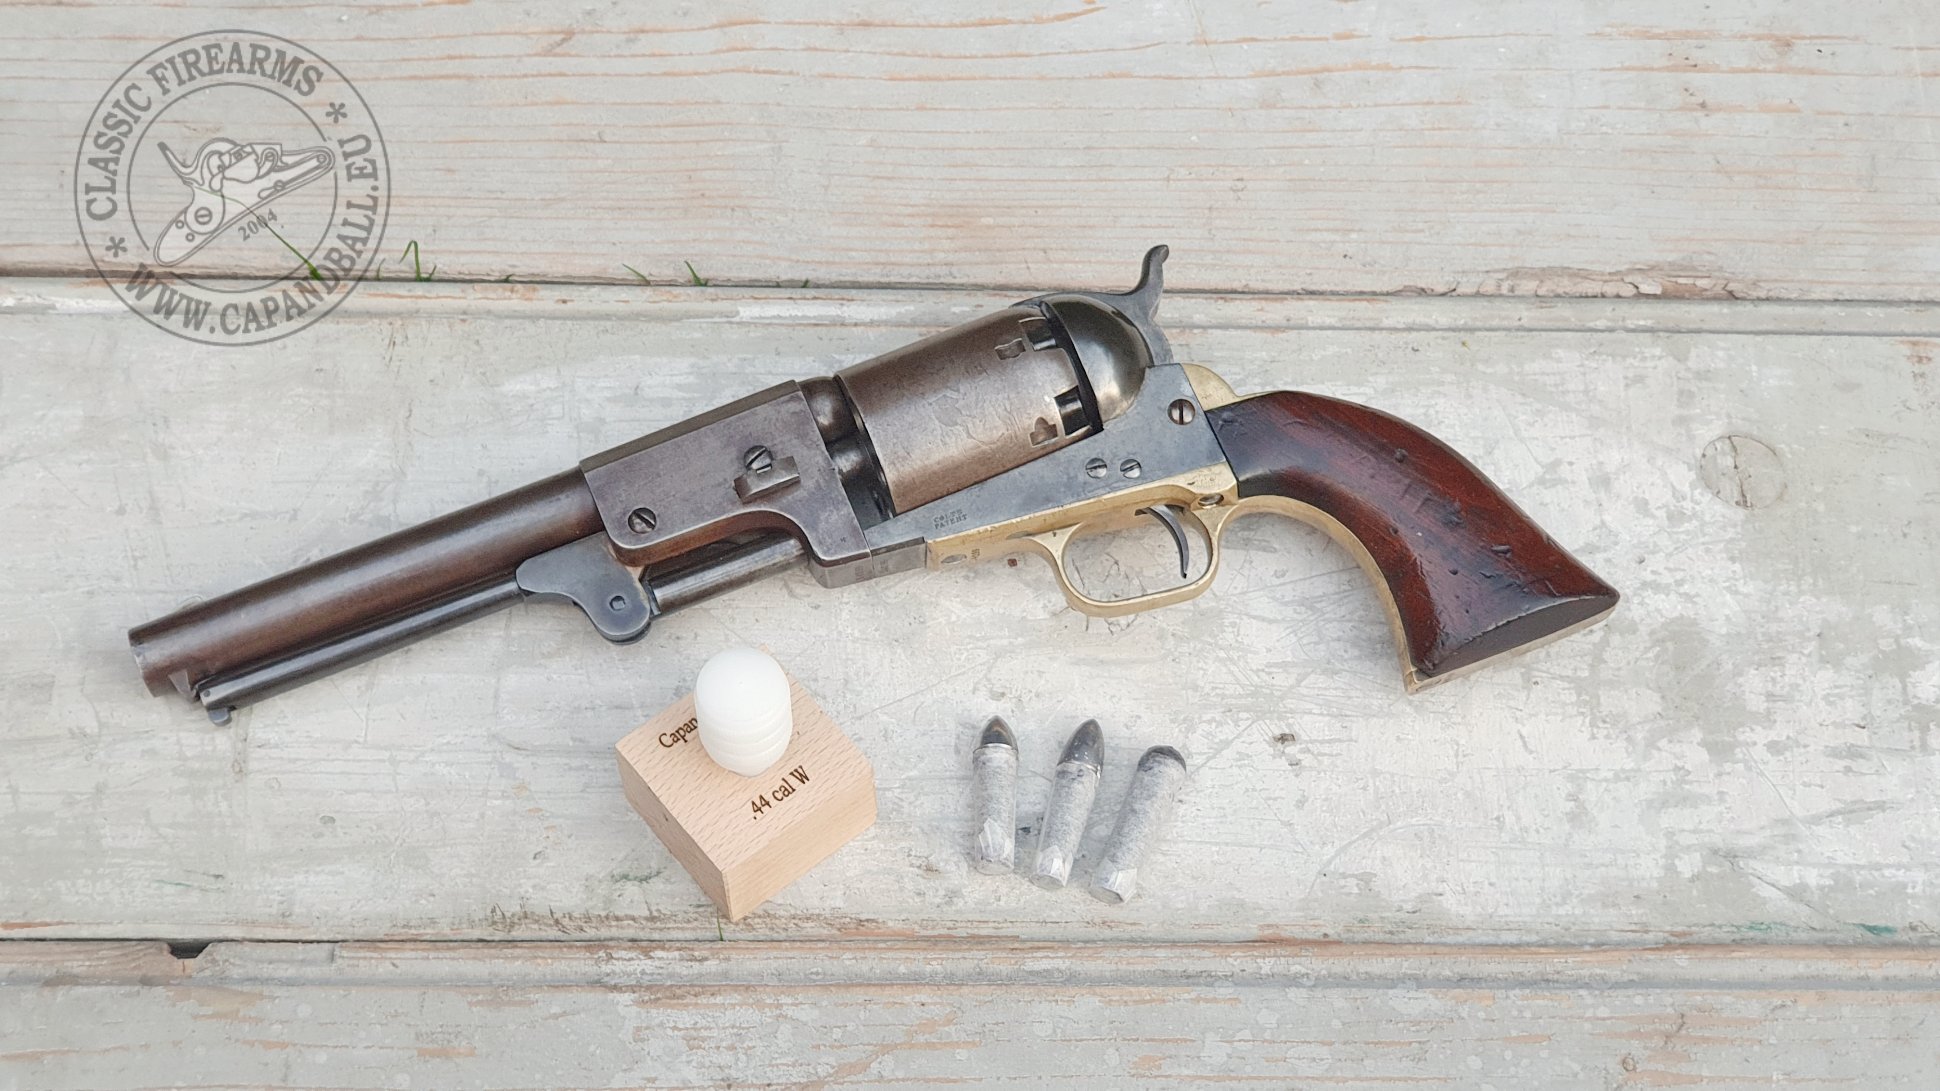 Paper cartridge former for .44 cal percussion revolvers by Capandball 